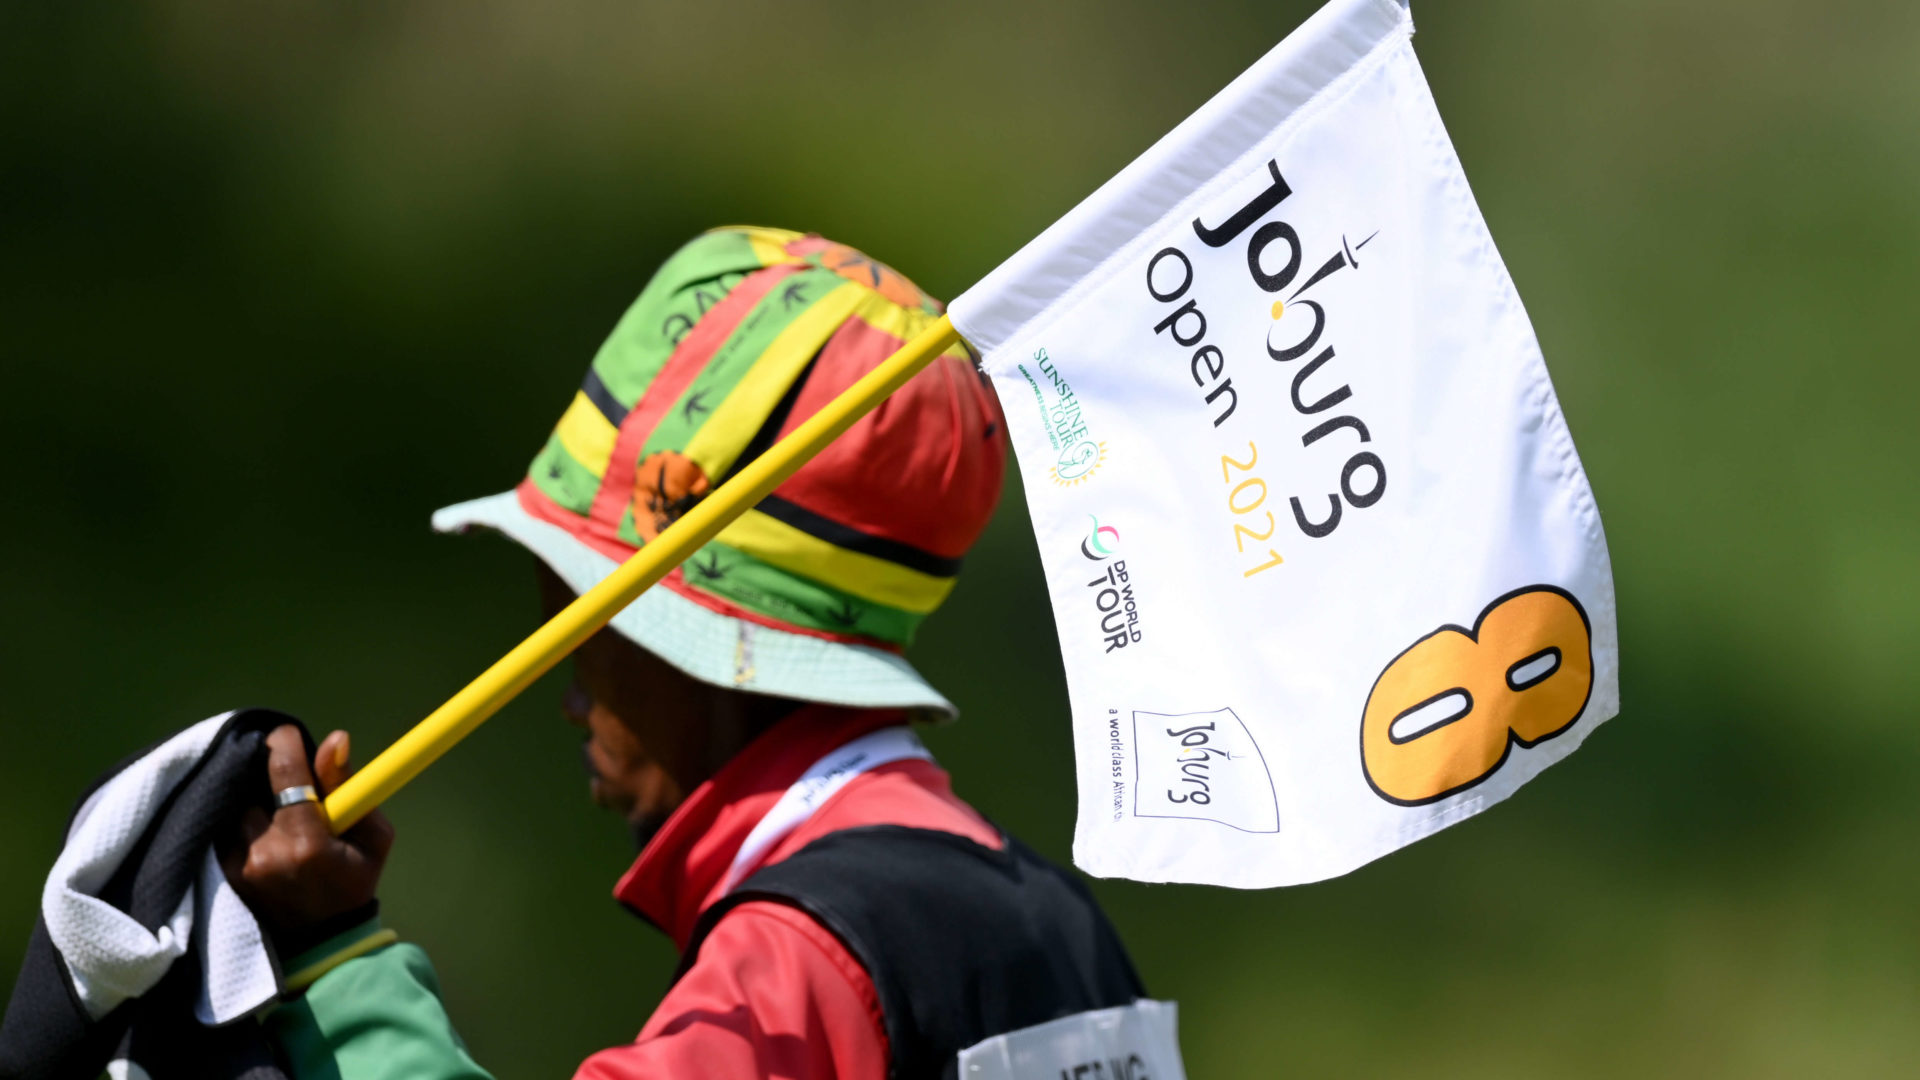 JOHANNESBURG, SOUTH AFRICA - NOVEMBER 26: The caddie of Luke Jerling of South Africa during the second round of the JOBURG Open at Randpark Golf Club on November 26, 2021 in Johannesburg, South Africa. (Photo by Stuart Franklin/Getty Images)